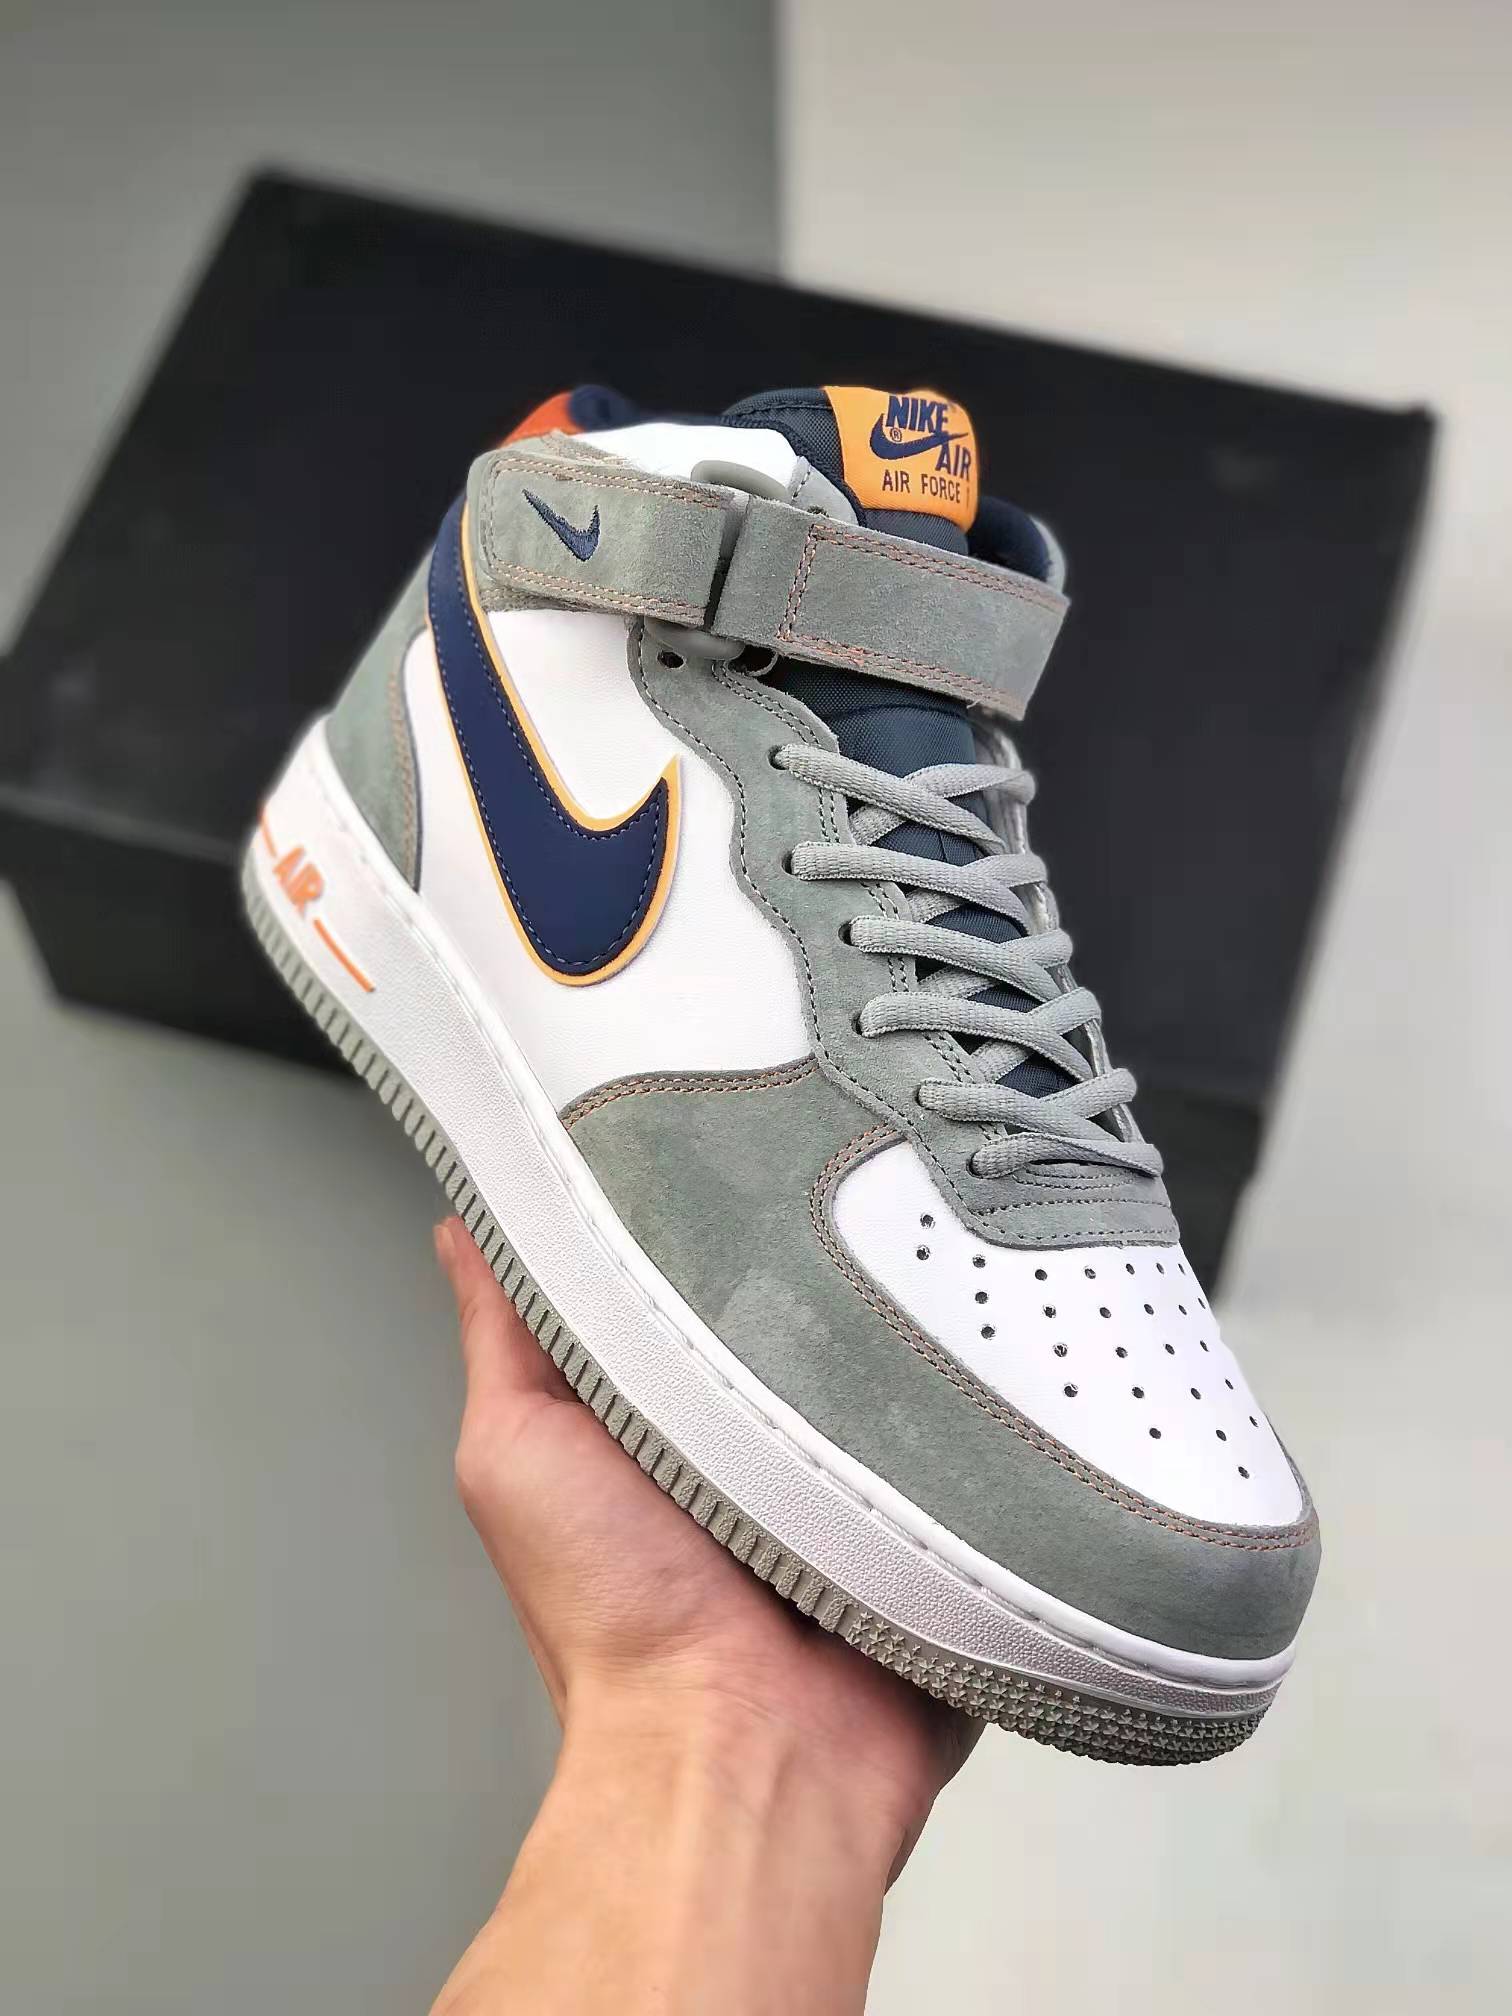 Nike Air Force 1 07 Mid Grey White Navy Orange CQ5059-203 - Stylish and Versatile Sneakers